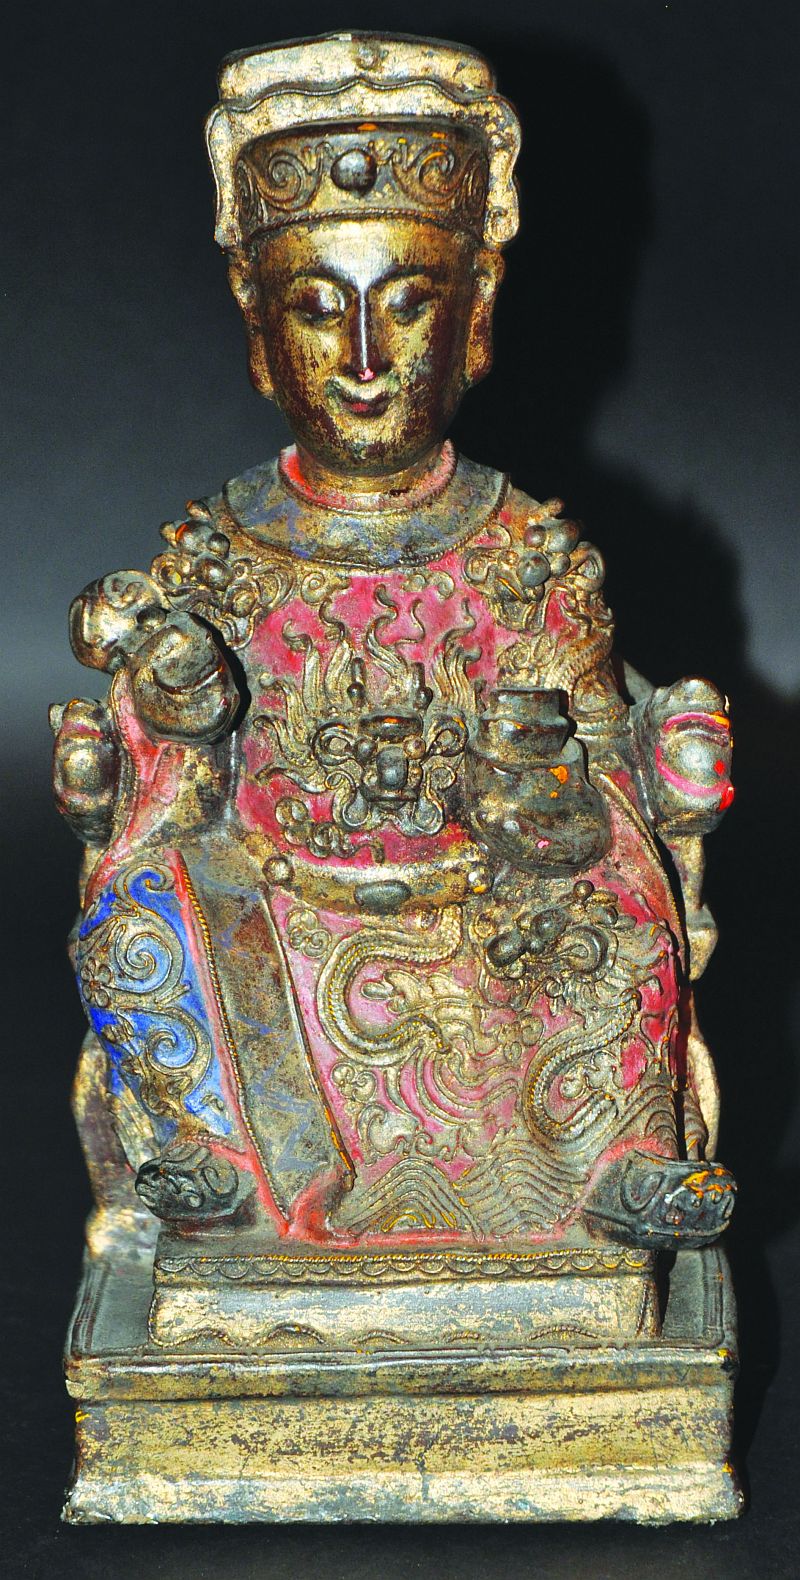 A 17TH-18TH CENTURY CHINESE LACQUERED, GILDED & CARVED WOOD FIGURE OF AN EMPEROR, seated on a dragon